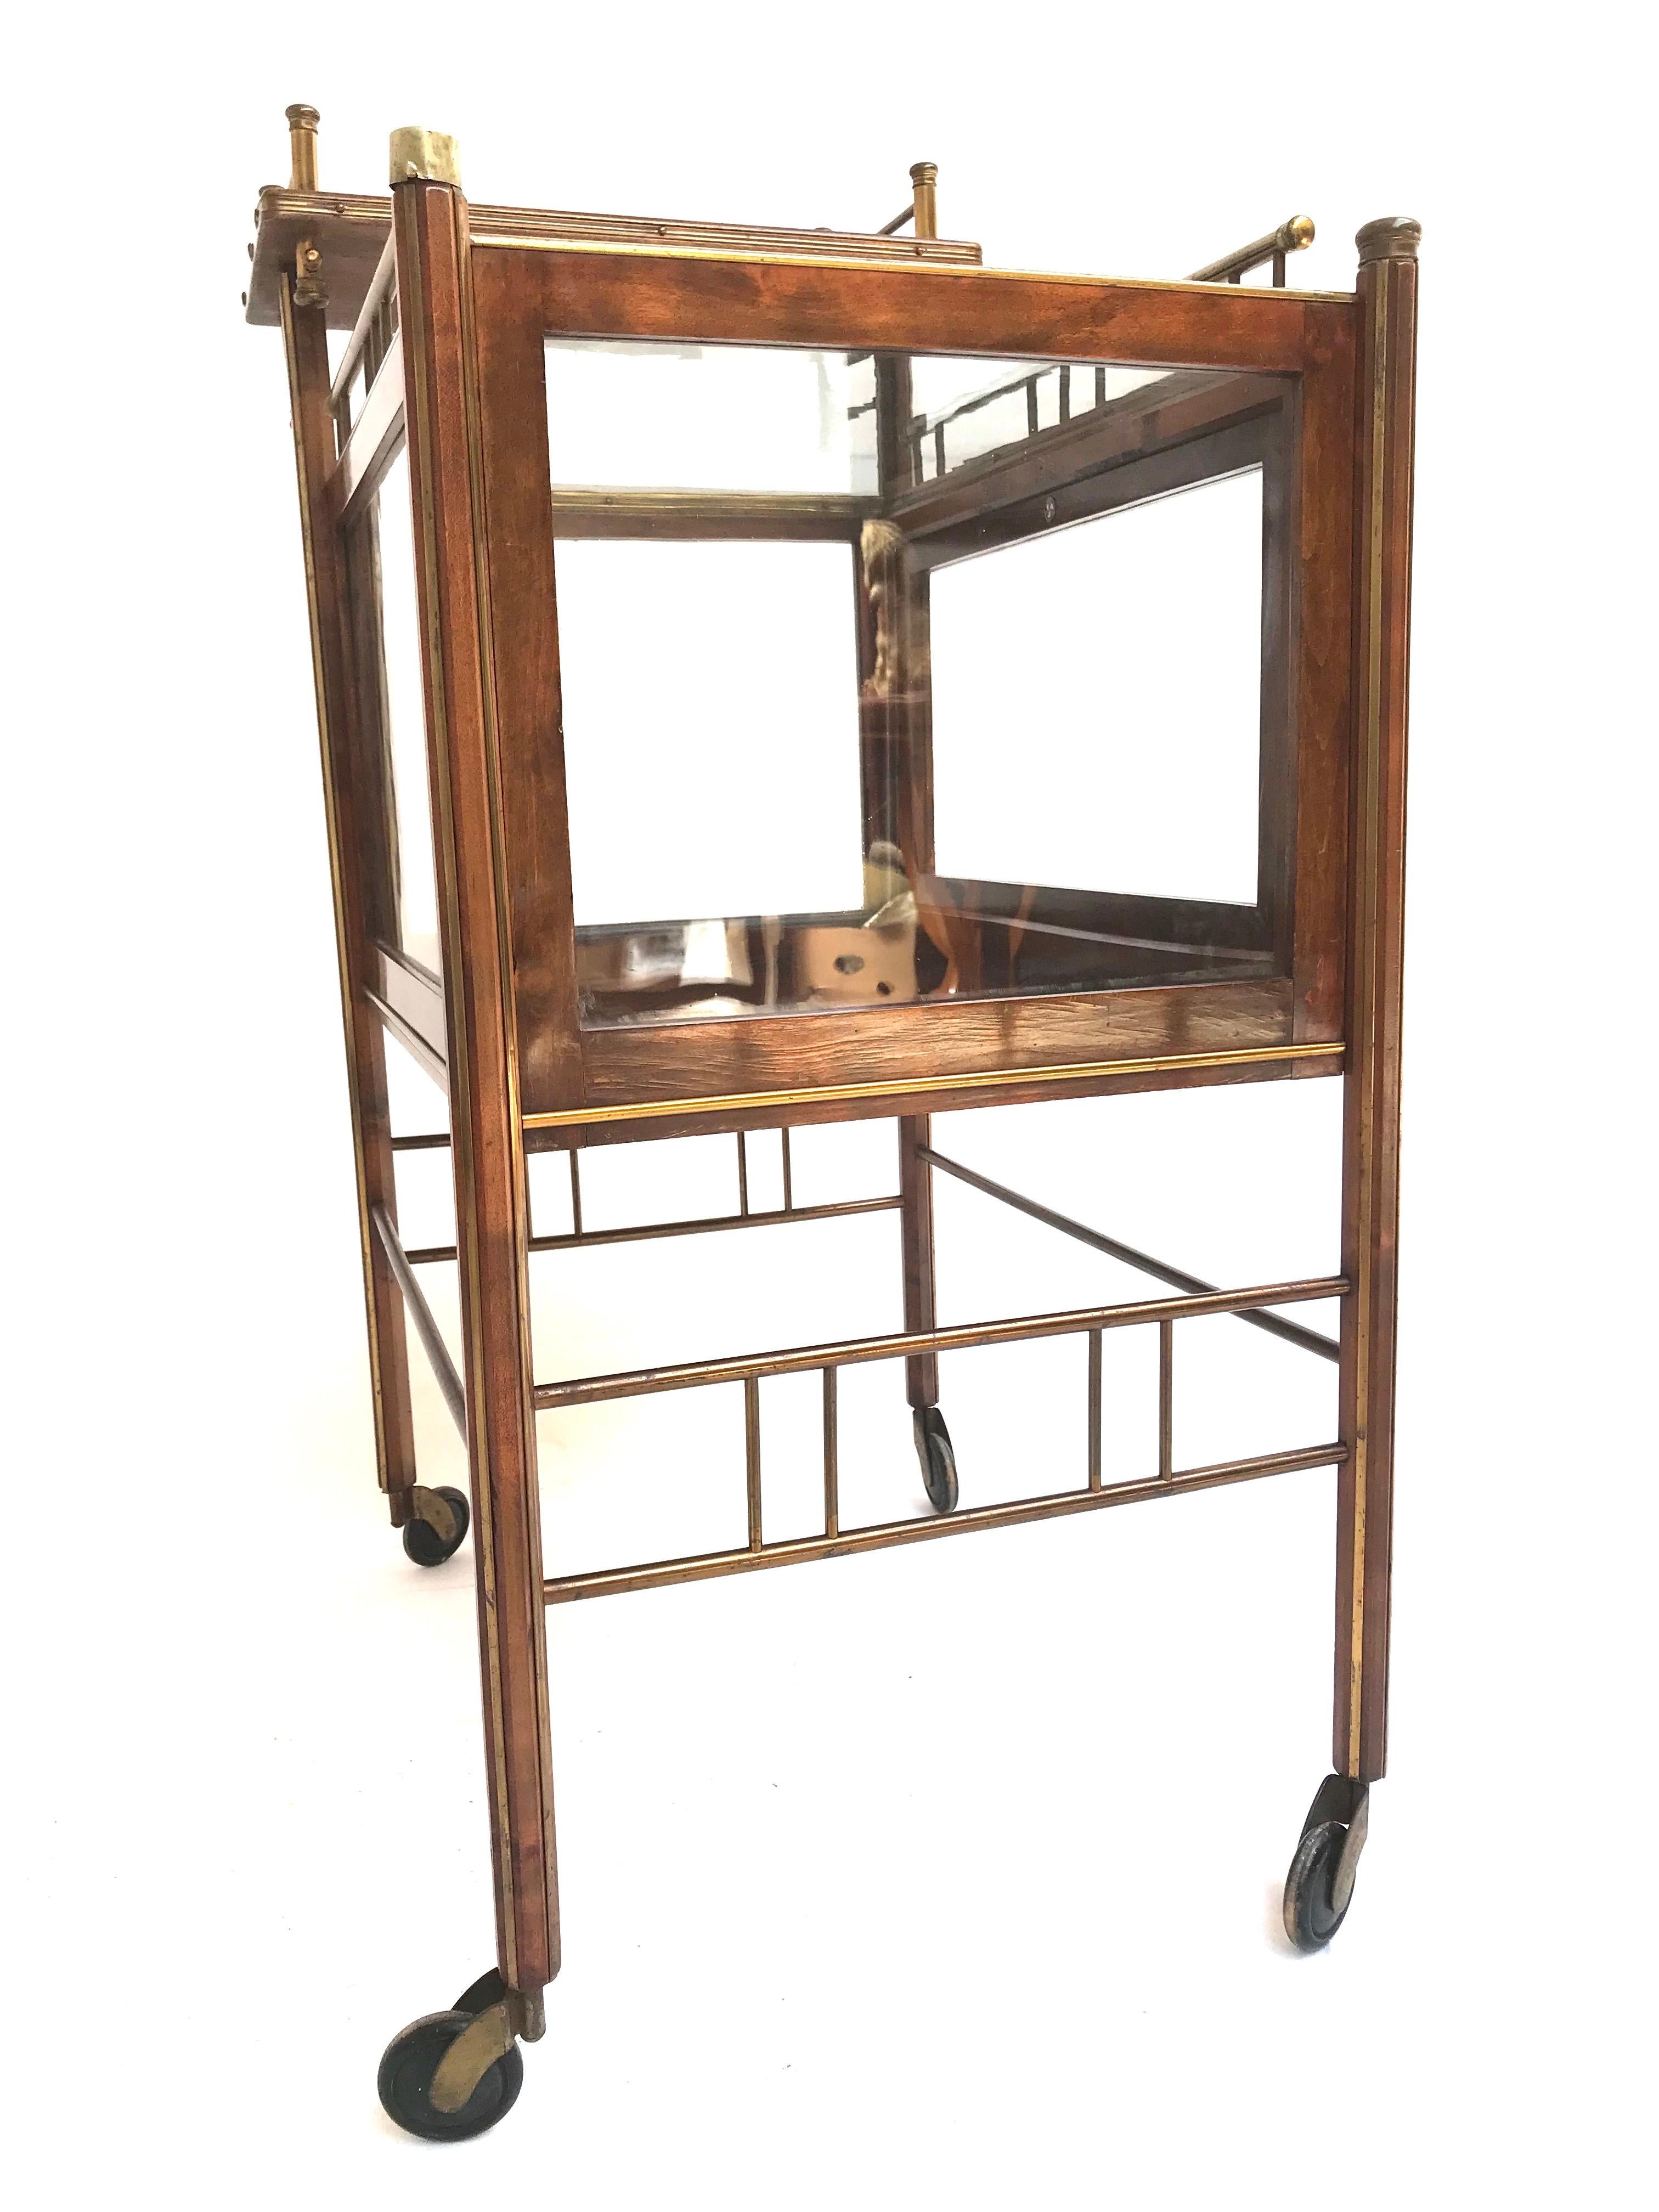 Stunning Asymmetrical Arts & Crafts Wood, Brass & Glass Drinks Trolley or Cart For Sale 3